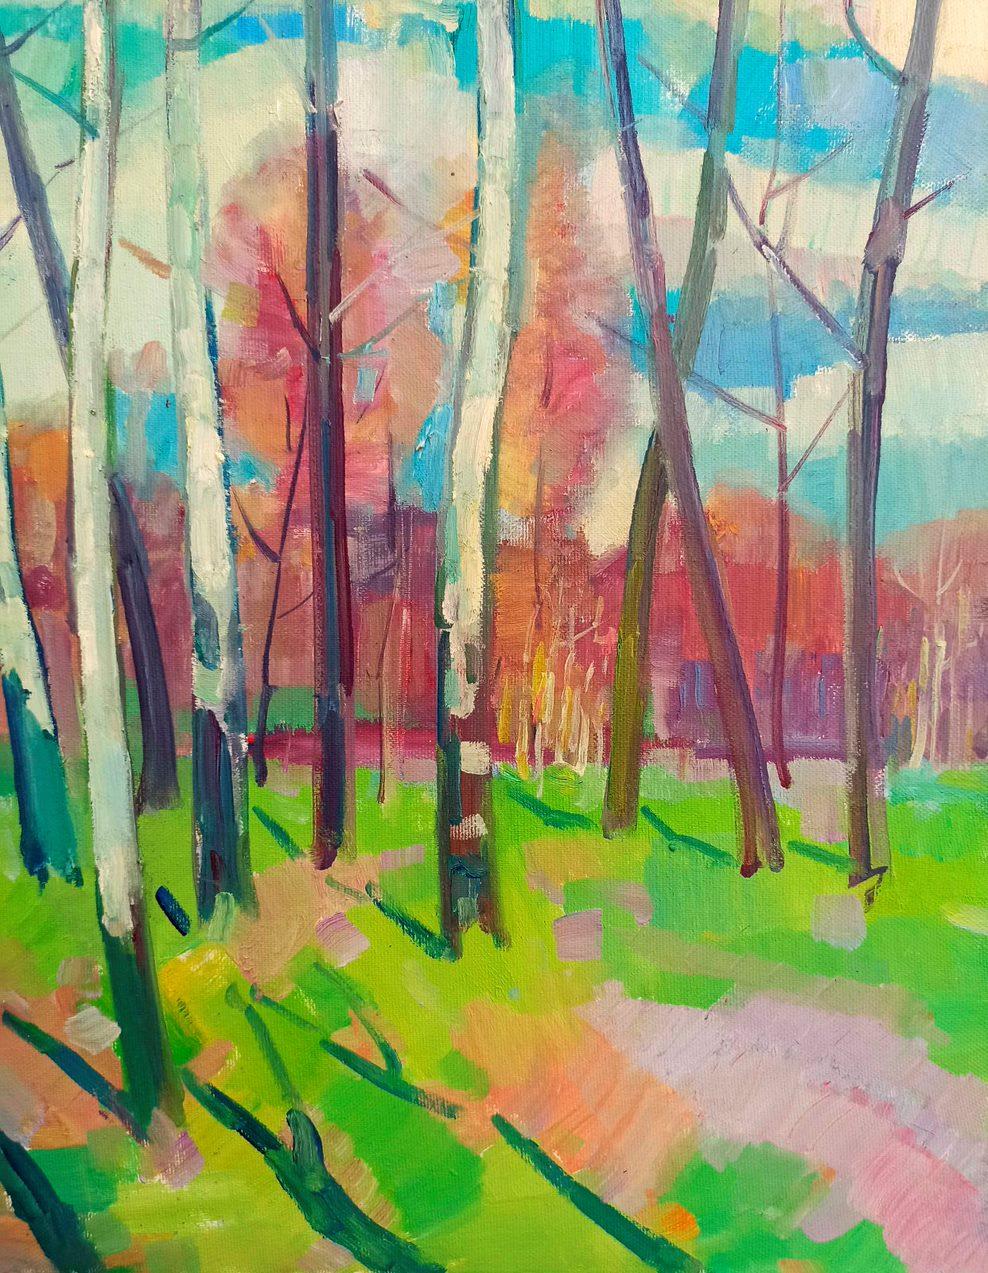 Birches Grove, Trees, Landscape, Original oil Painting, Ready to Hang - Gray Landscape Painting by Peter Tovpev